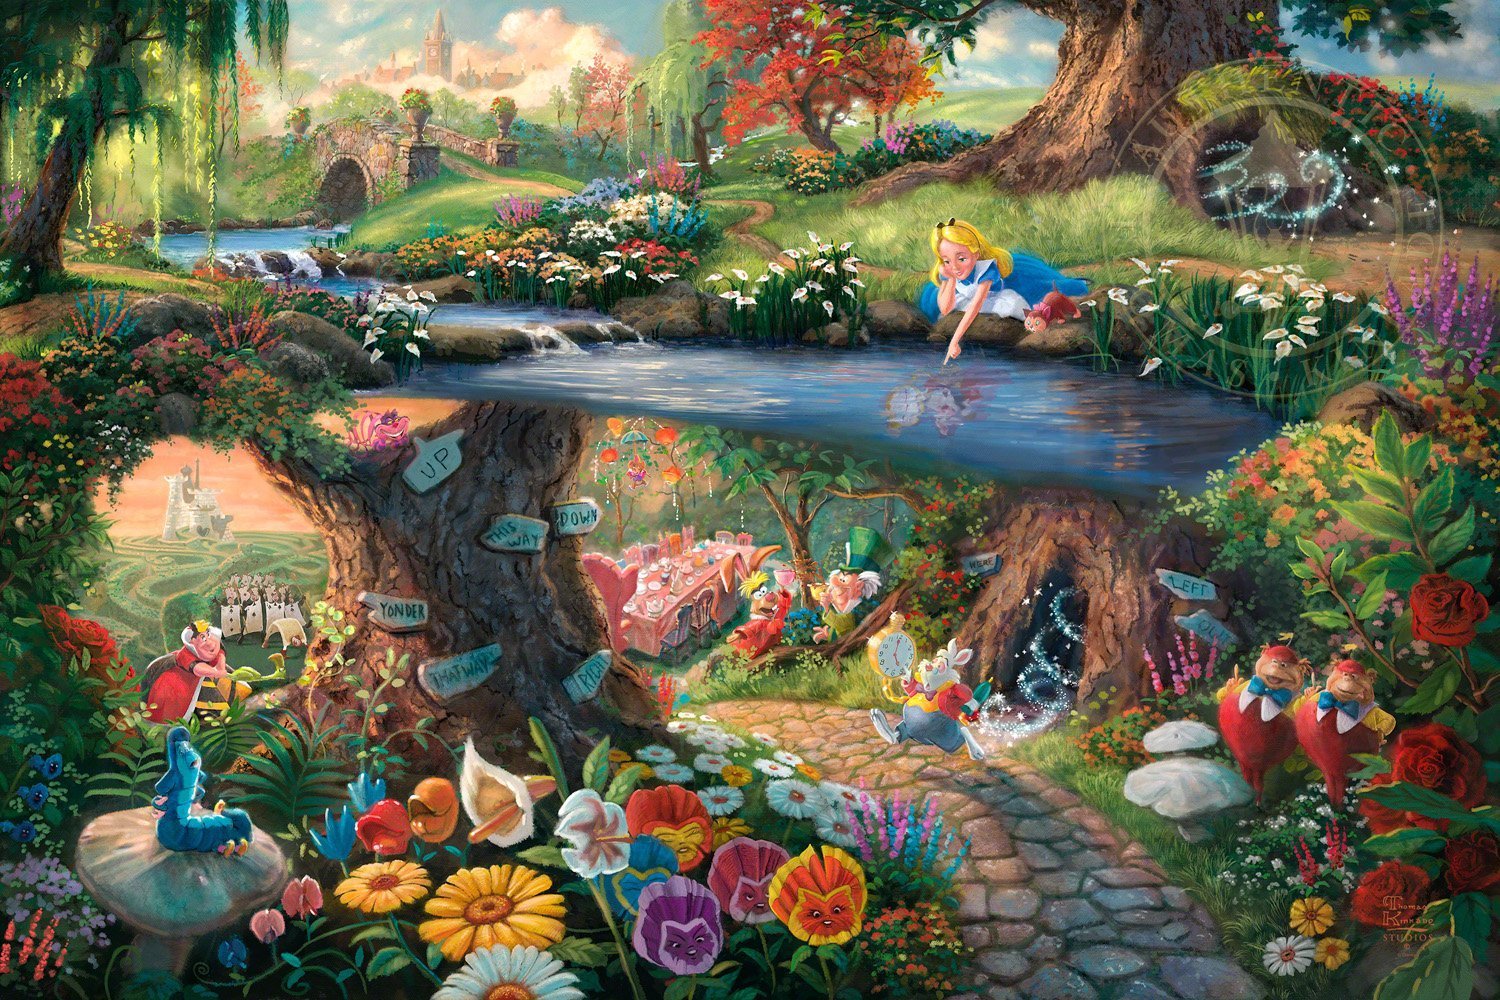 Alice in Wonderland captures all characters, in this beautiful colorful landscape. The hurried White Rabbit, the enigmatic Caterpillar, the lunatic Mad Hatter, the nonsensical Tweedledee, and Tweedledum all play a part in the world down the hole. Alice, viewing it all with a child's innocence - unframed